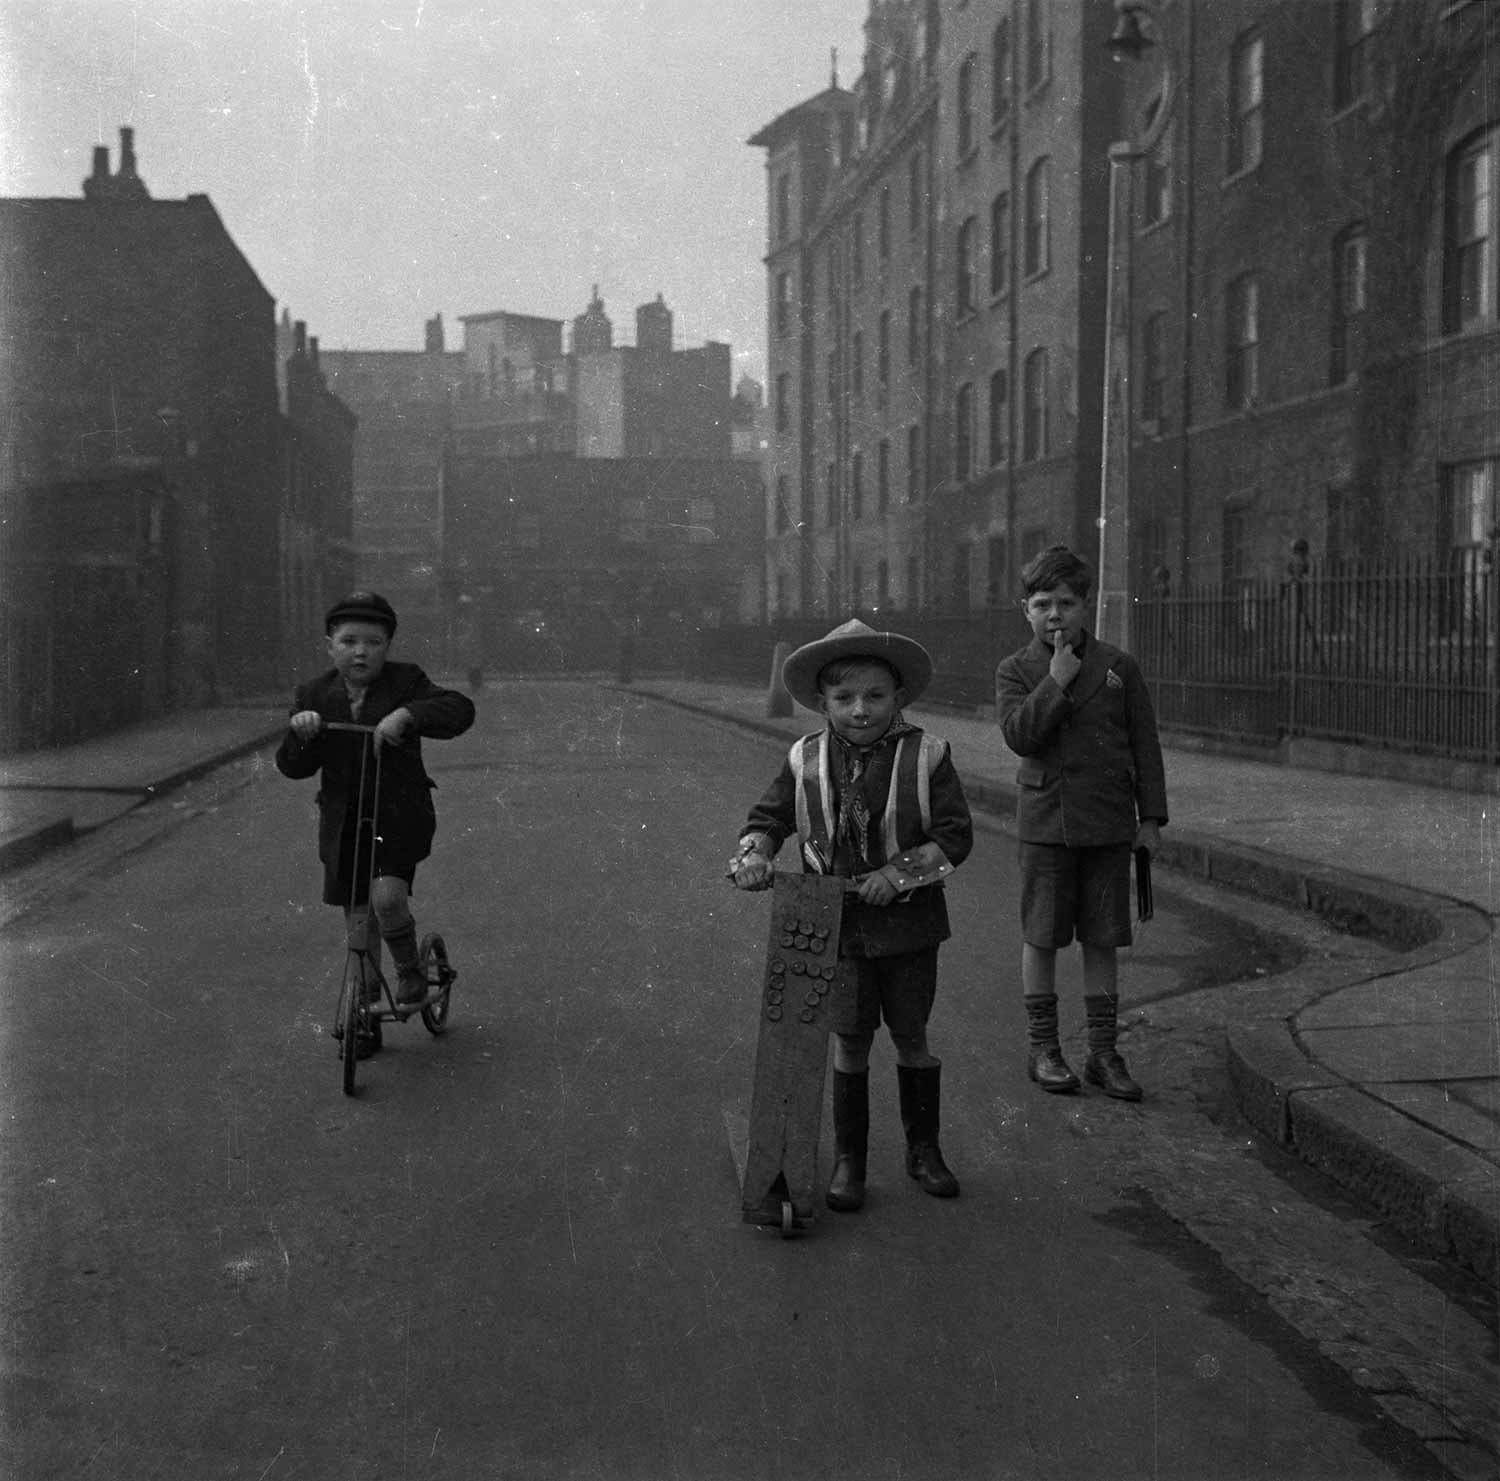 in the old East End of London, by photographer Nigel Henderson.